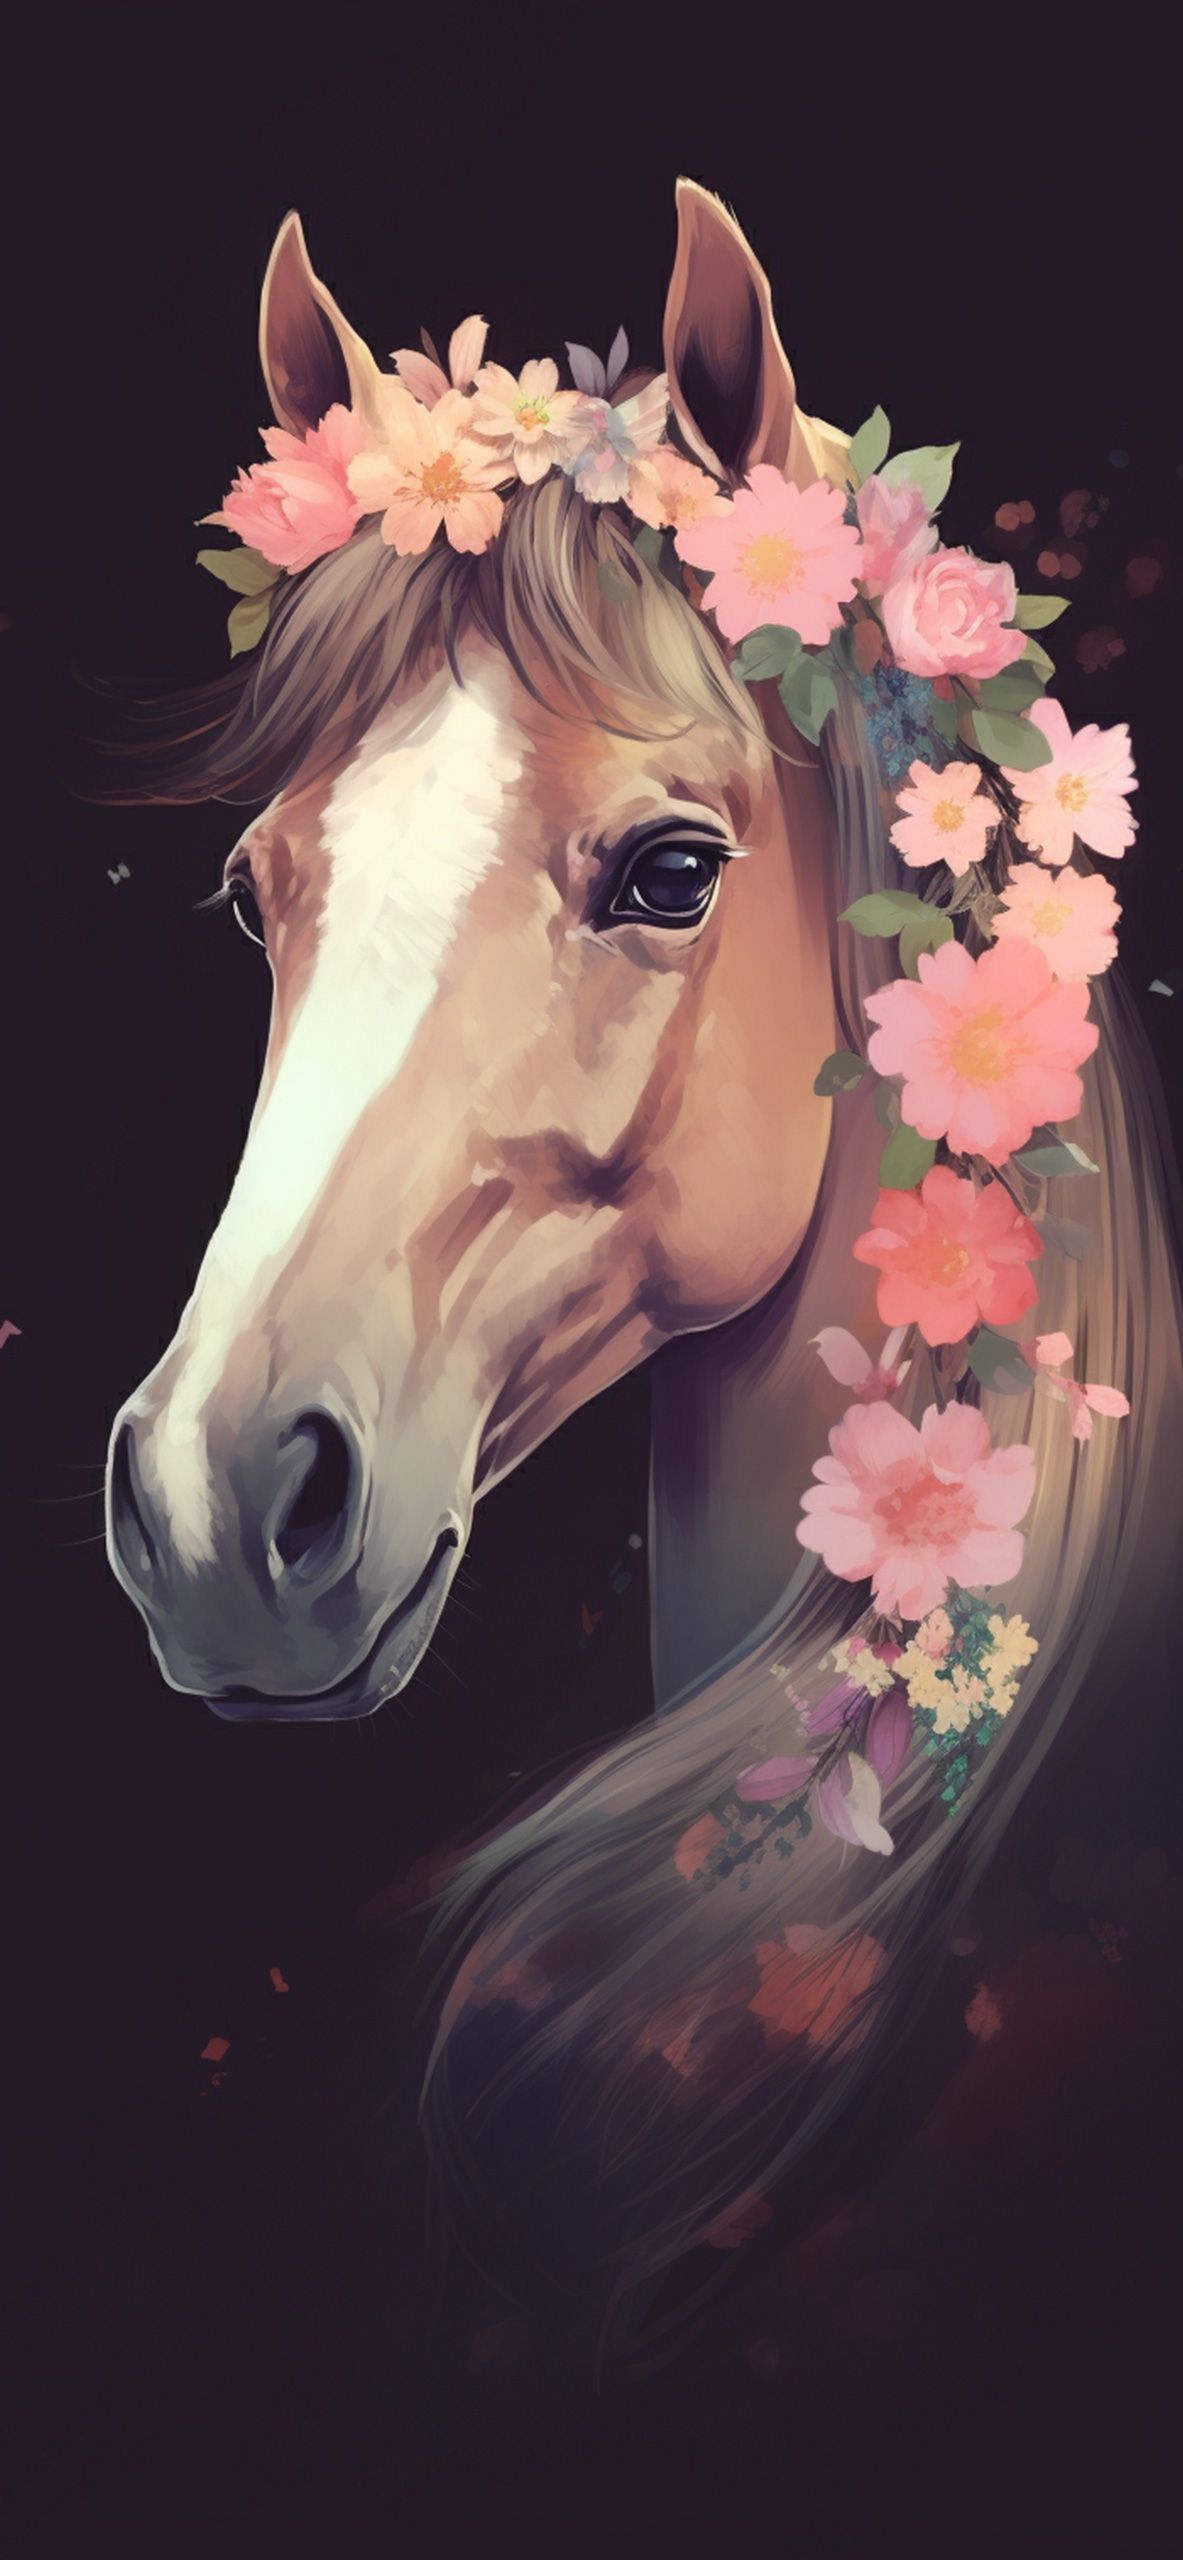 IPhone wallpaper of a horse with flowers in its mane - Horse